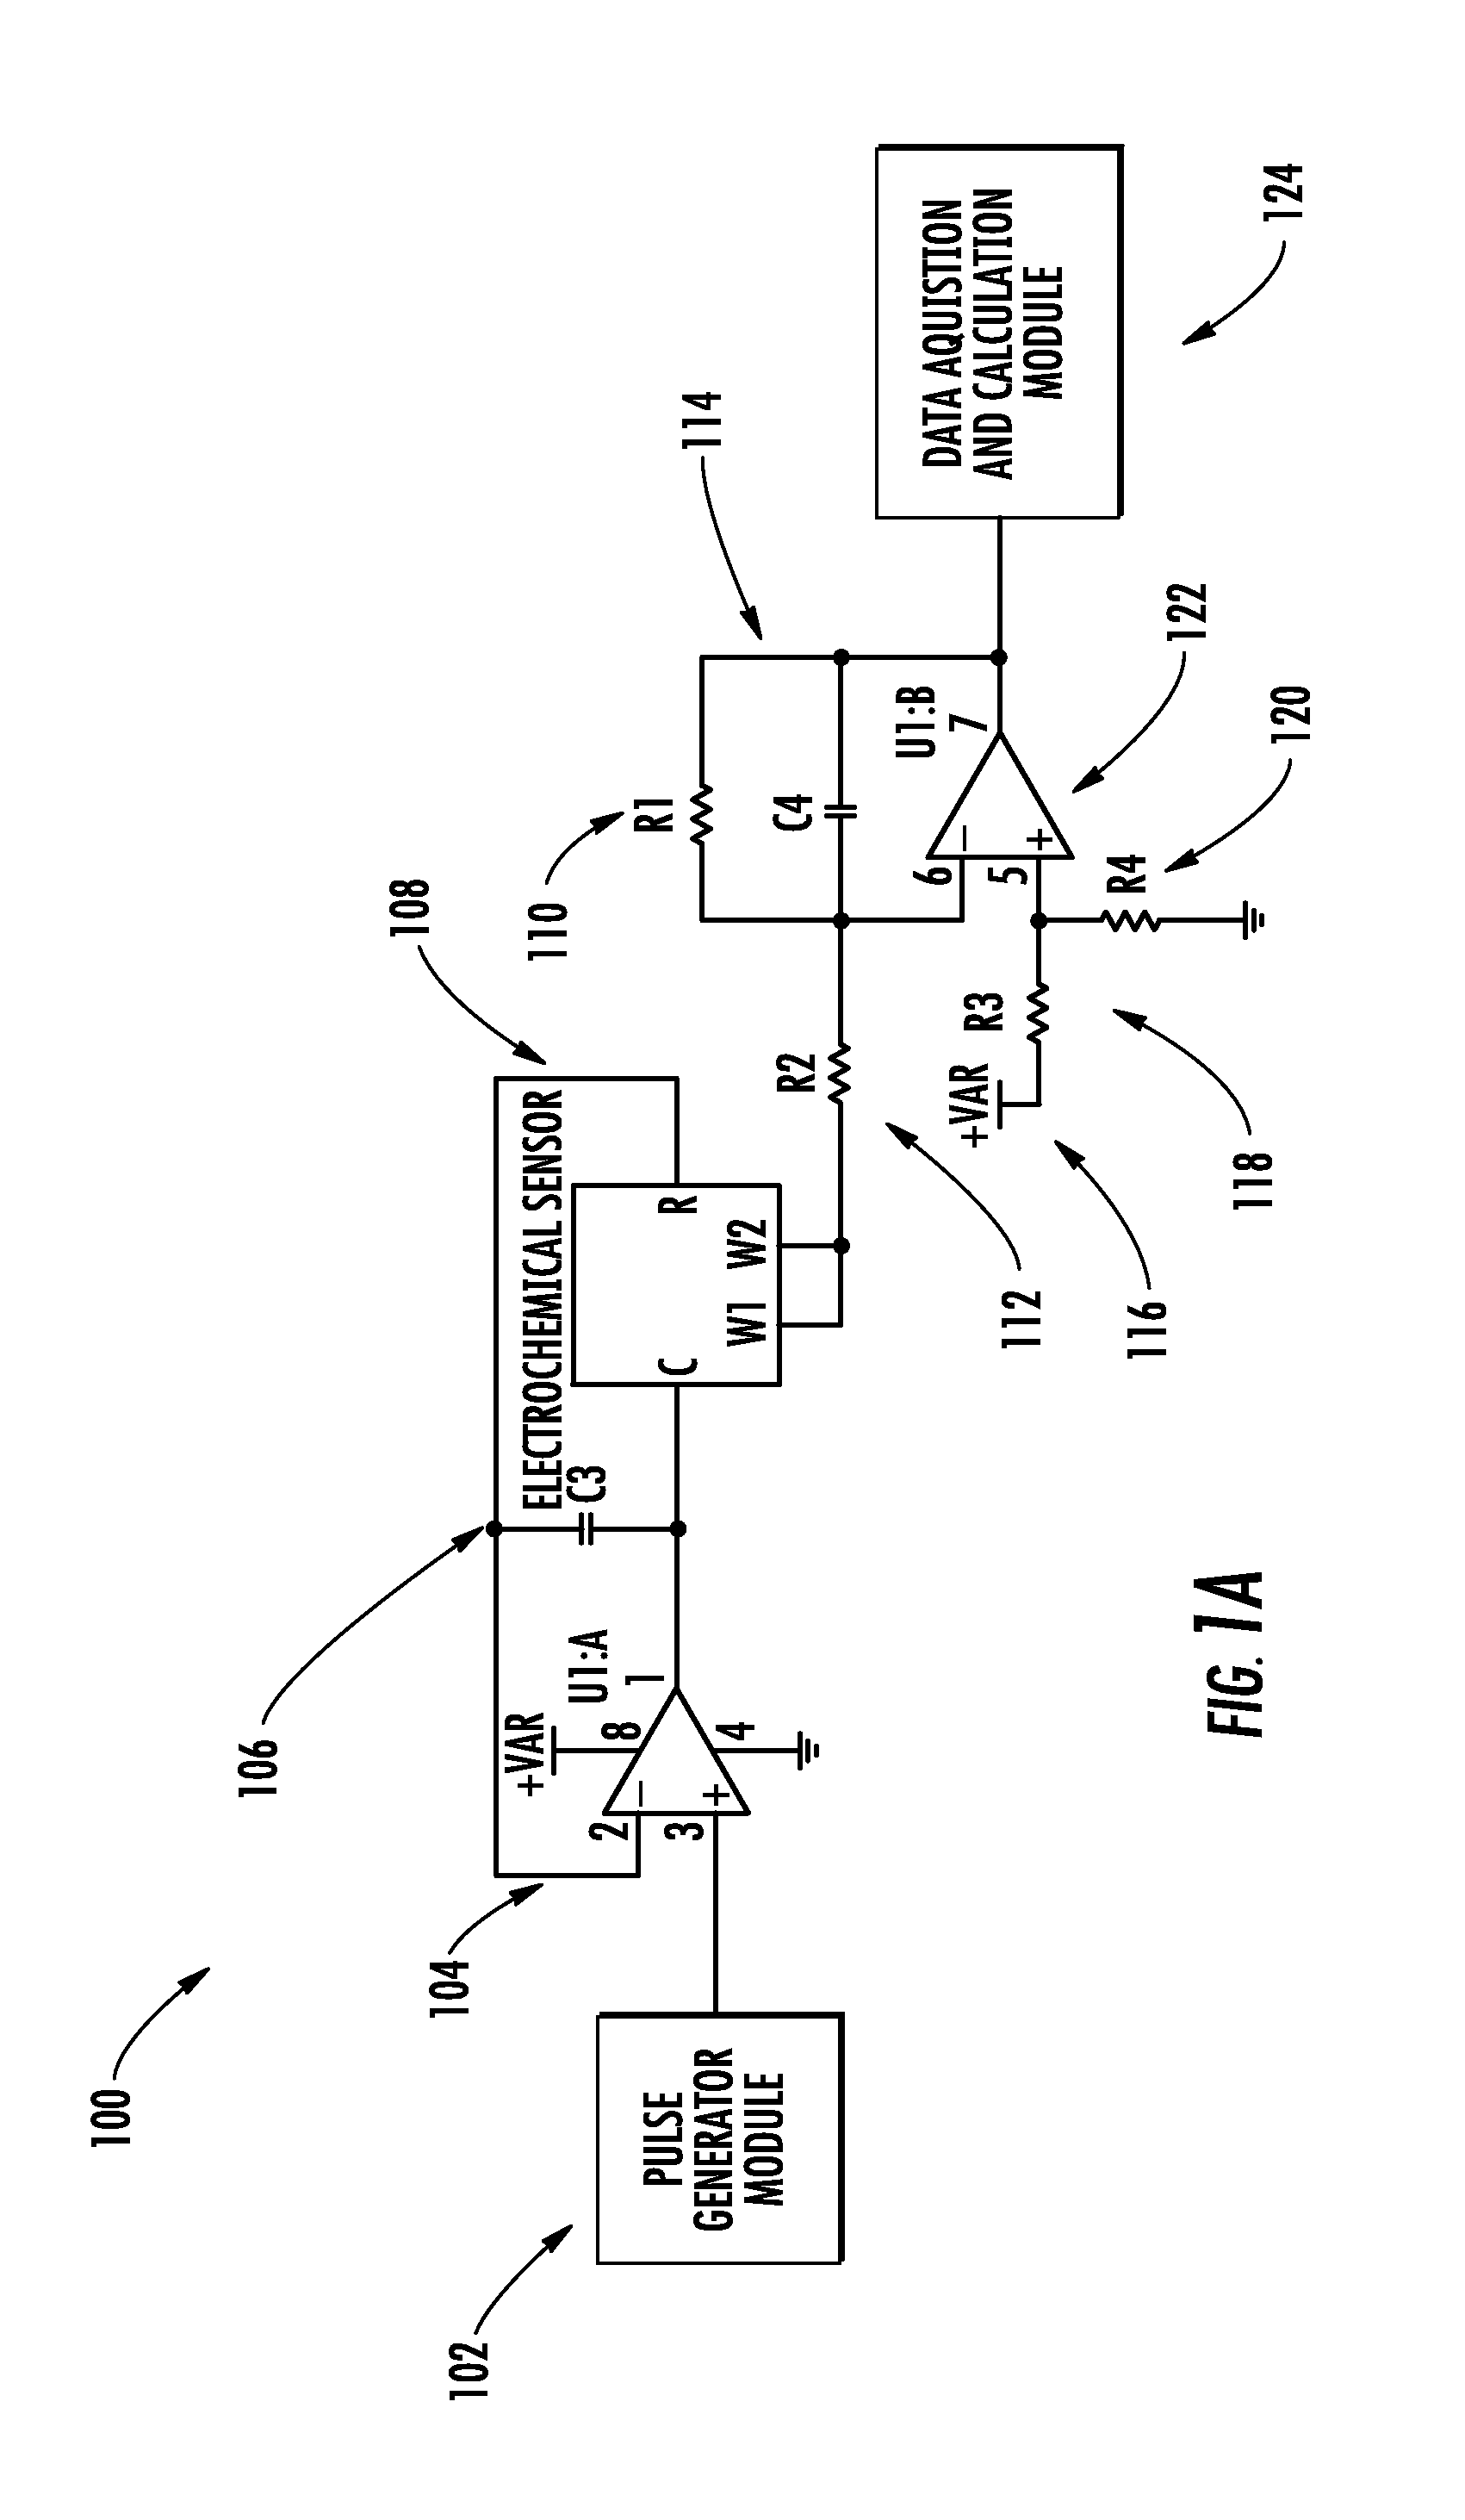 Automated self-compensation apparatus and methods for providing electrochemical sensors